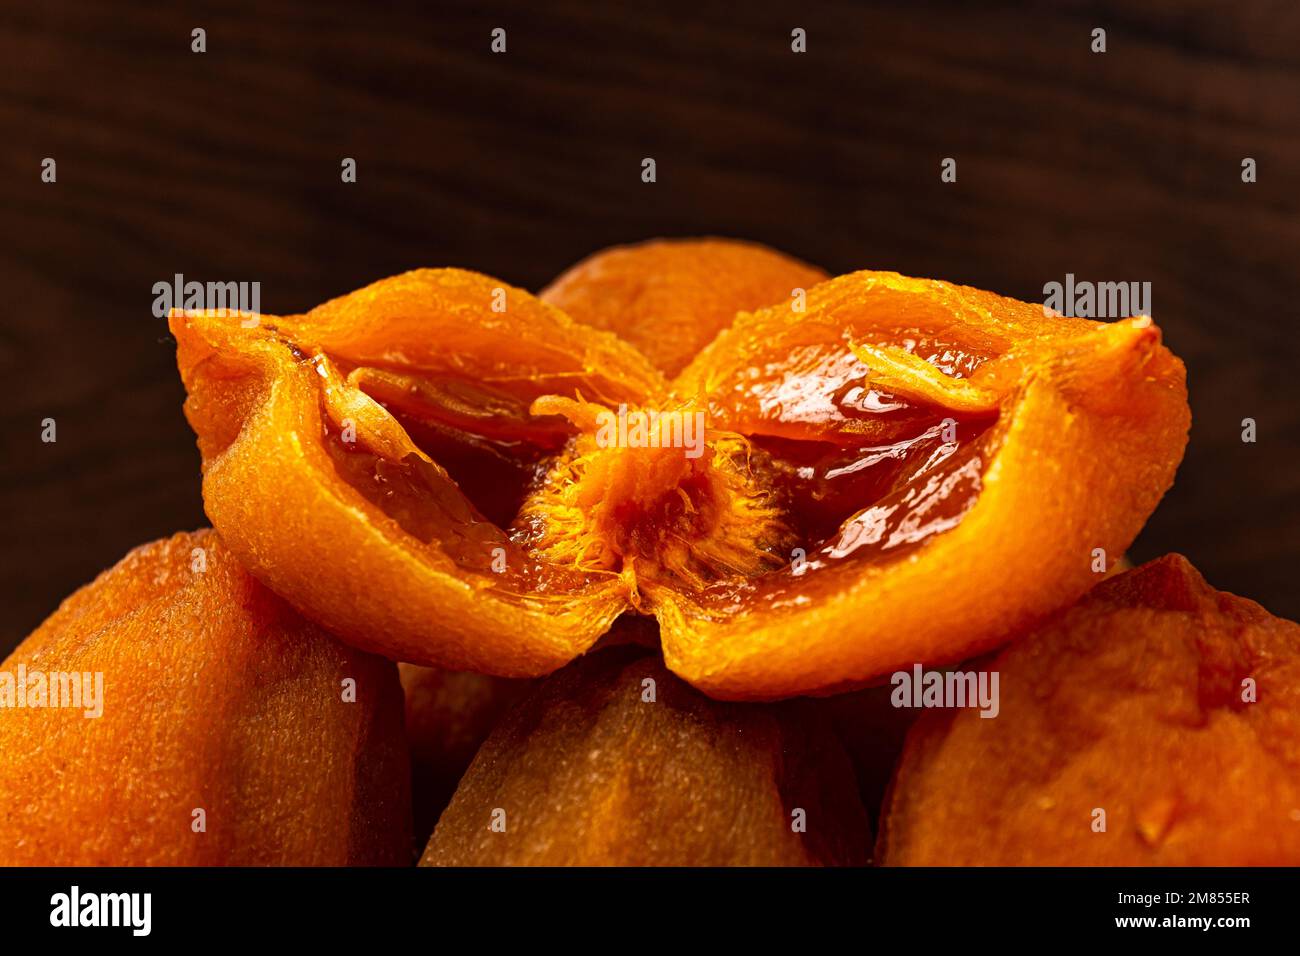 Half-dried persimmon made by drying persimmons Stock Photo